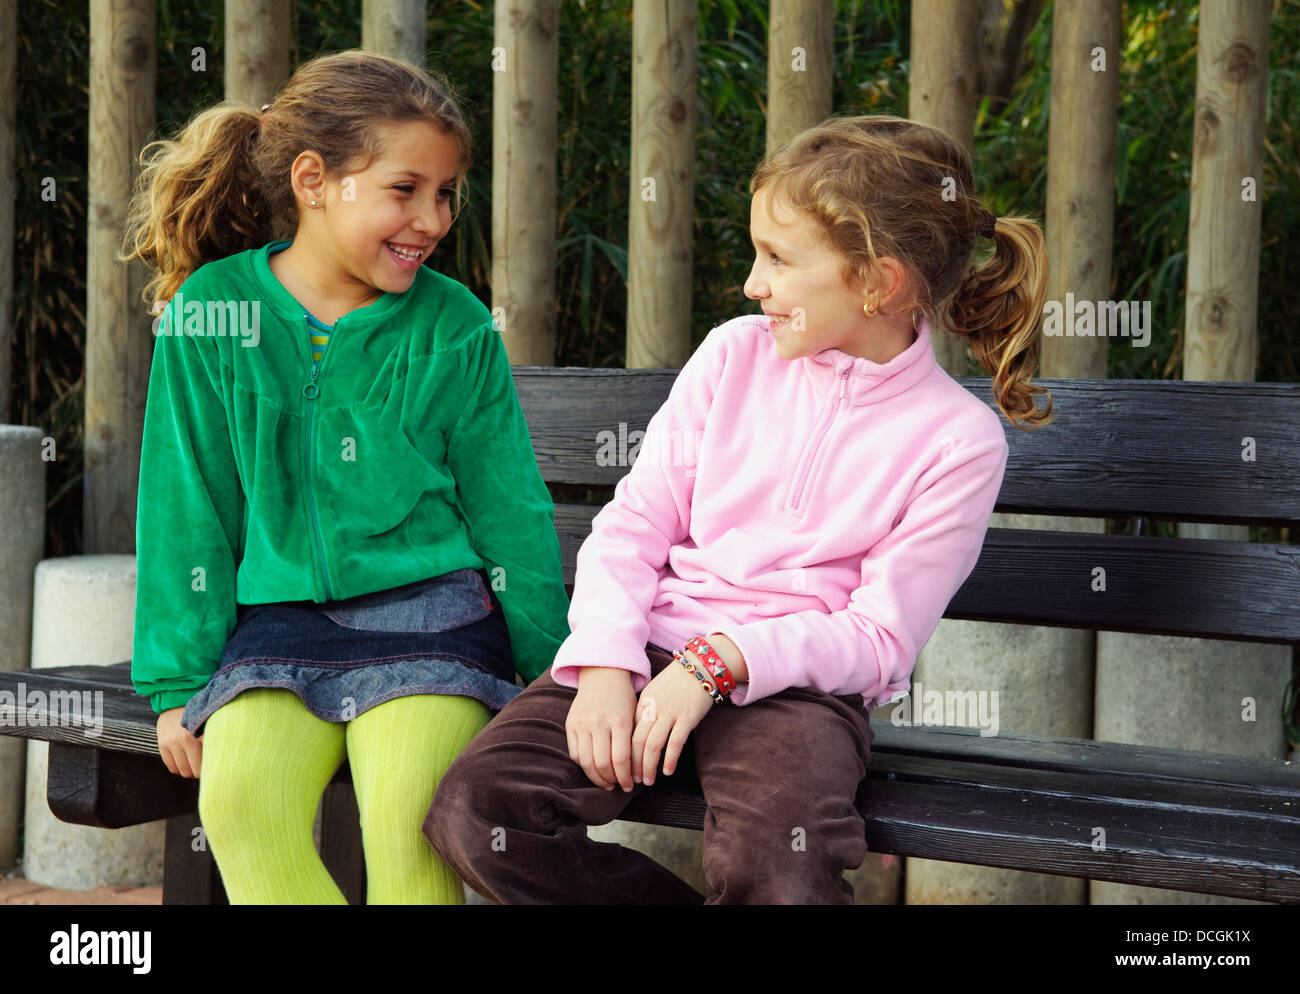 Two Girls Sitting Together Outdoors Stock Photo